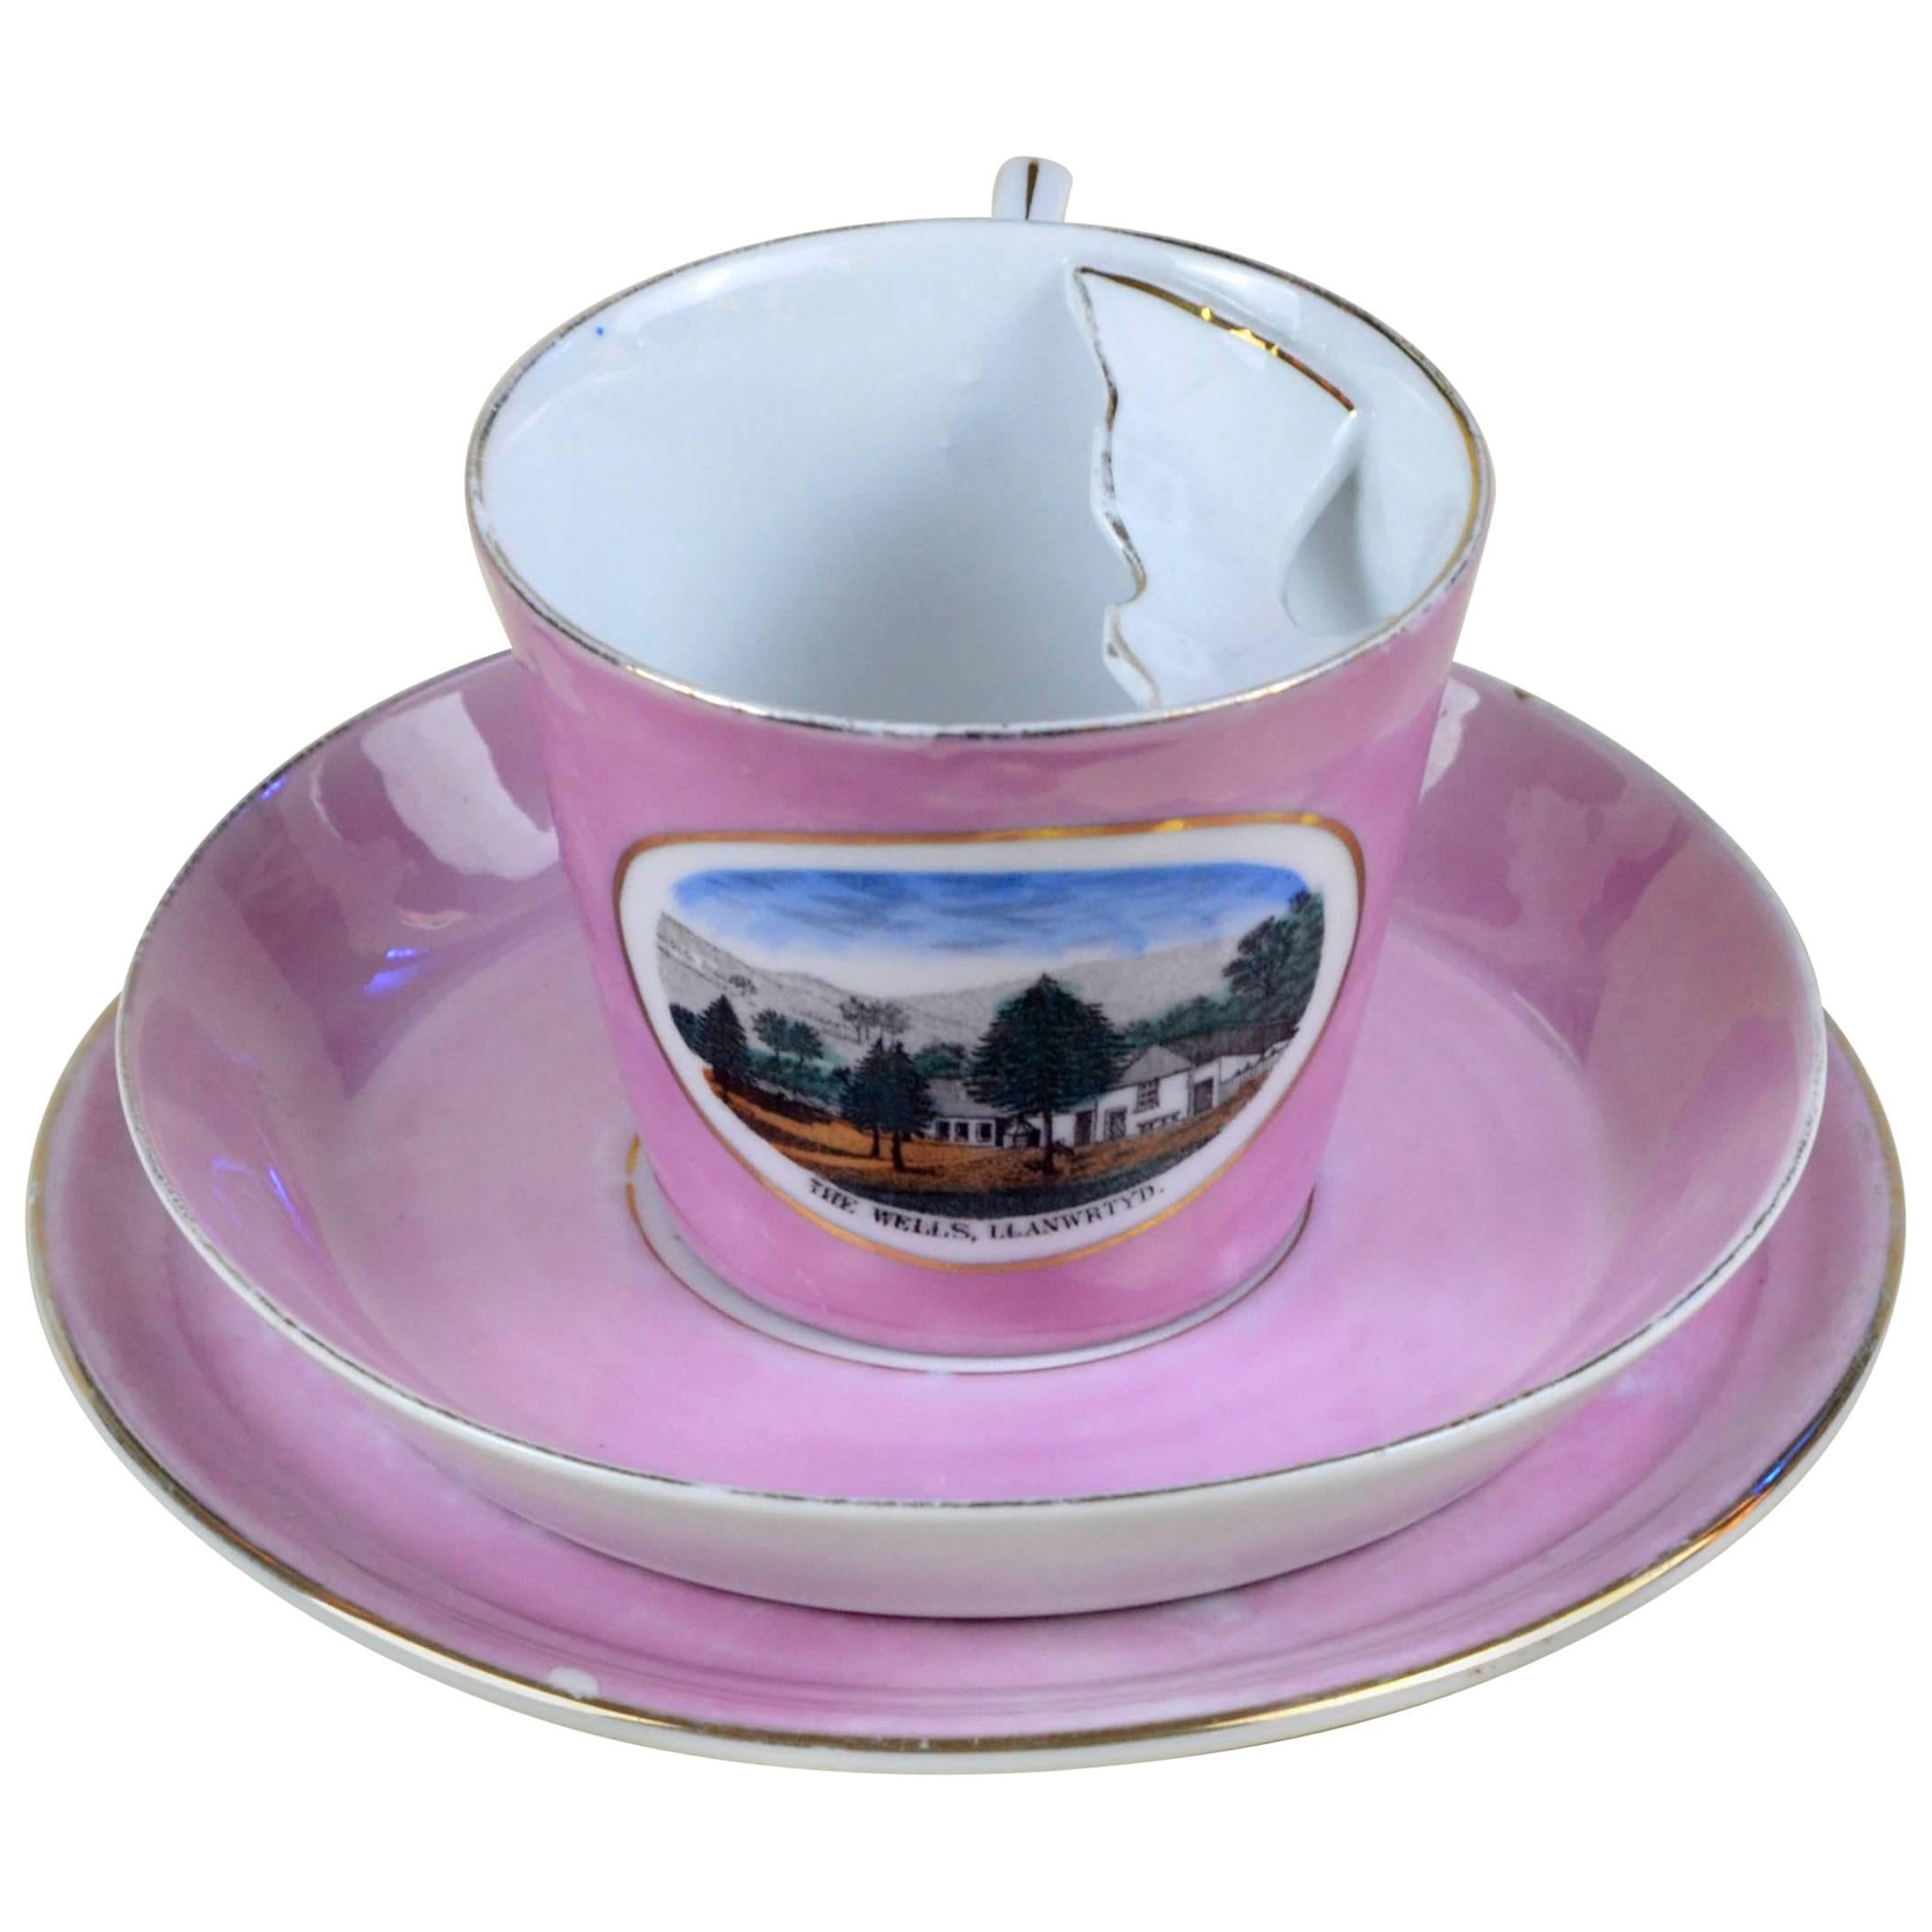 1900s Porcelain Souvenir Mustache Cup in Antique Pink Lustre Made in Germany For Sale